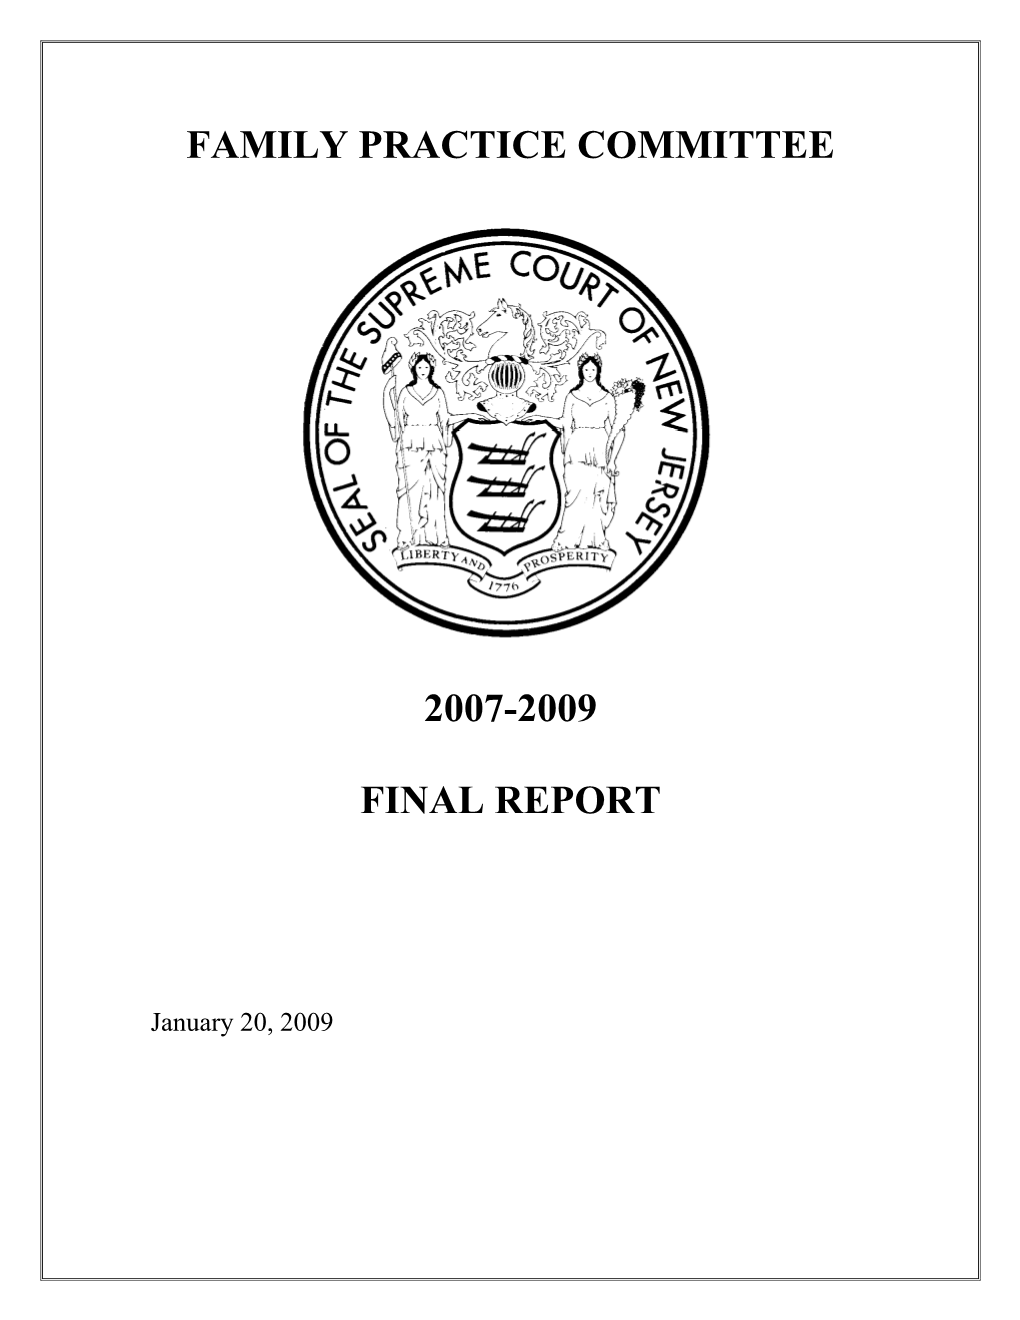 Family Practice Committee 2007-2009 Final Report